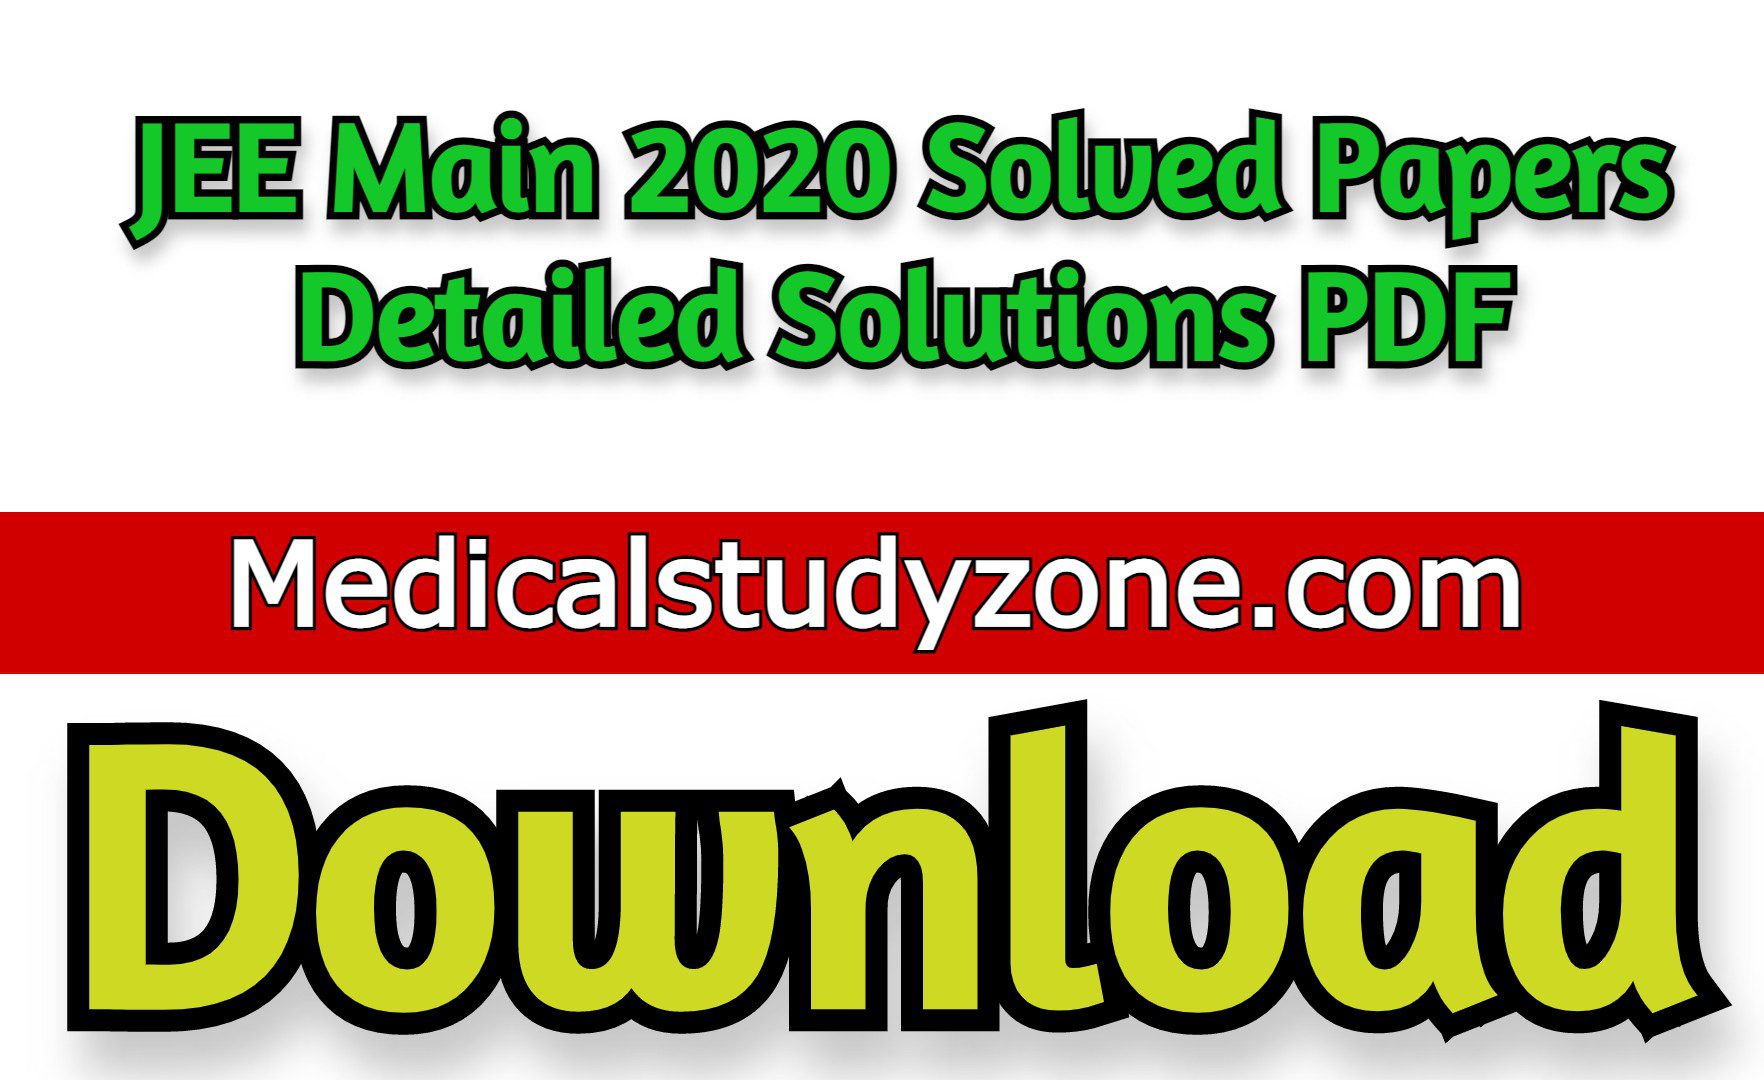 JEE Main 2020 Solved Papers Detailed Solutions PDF Free Download